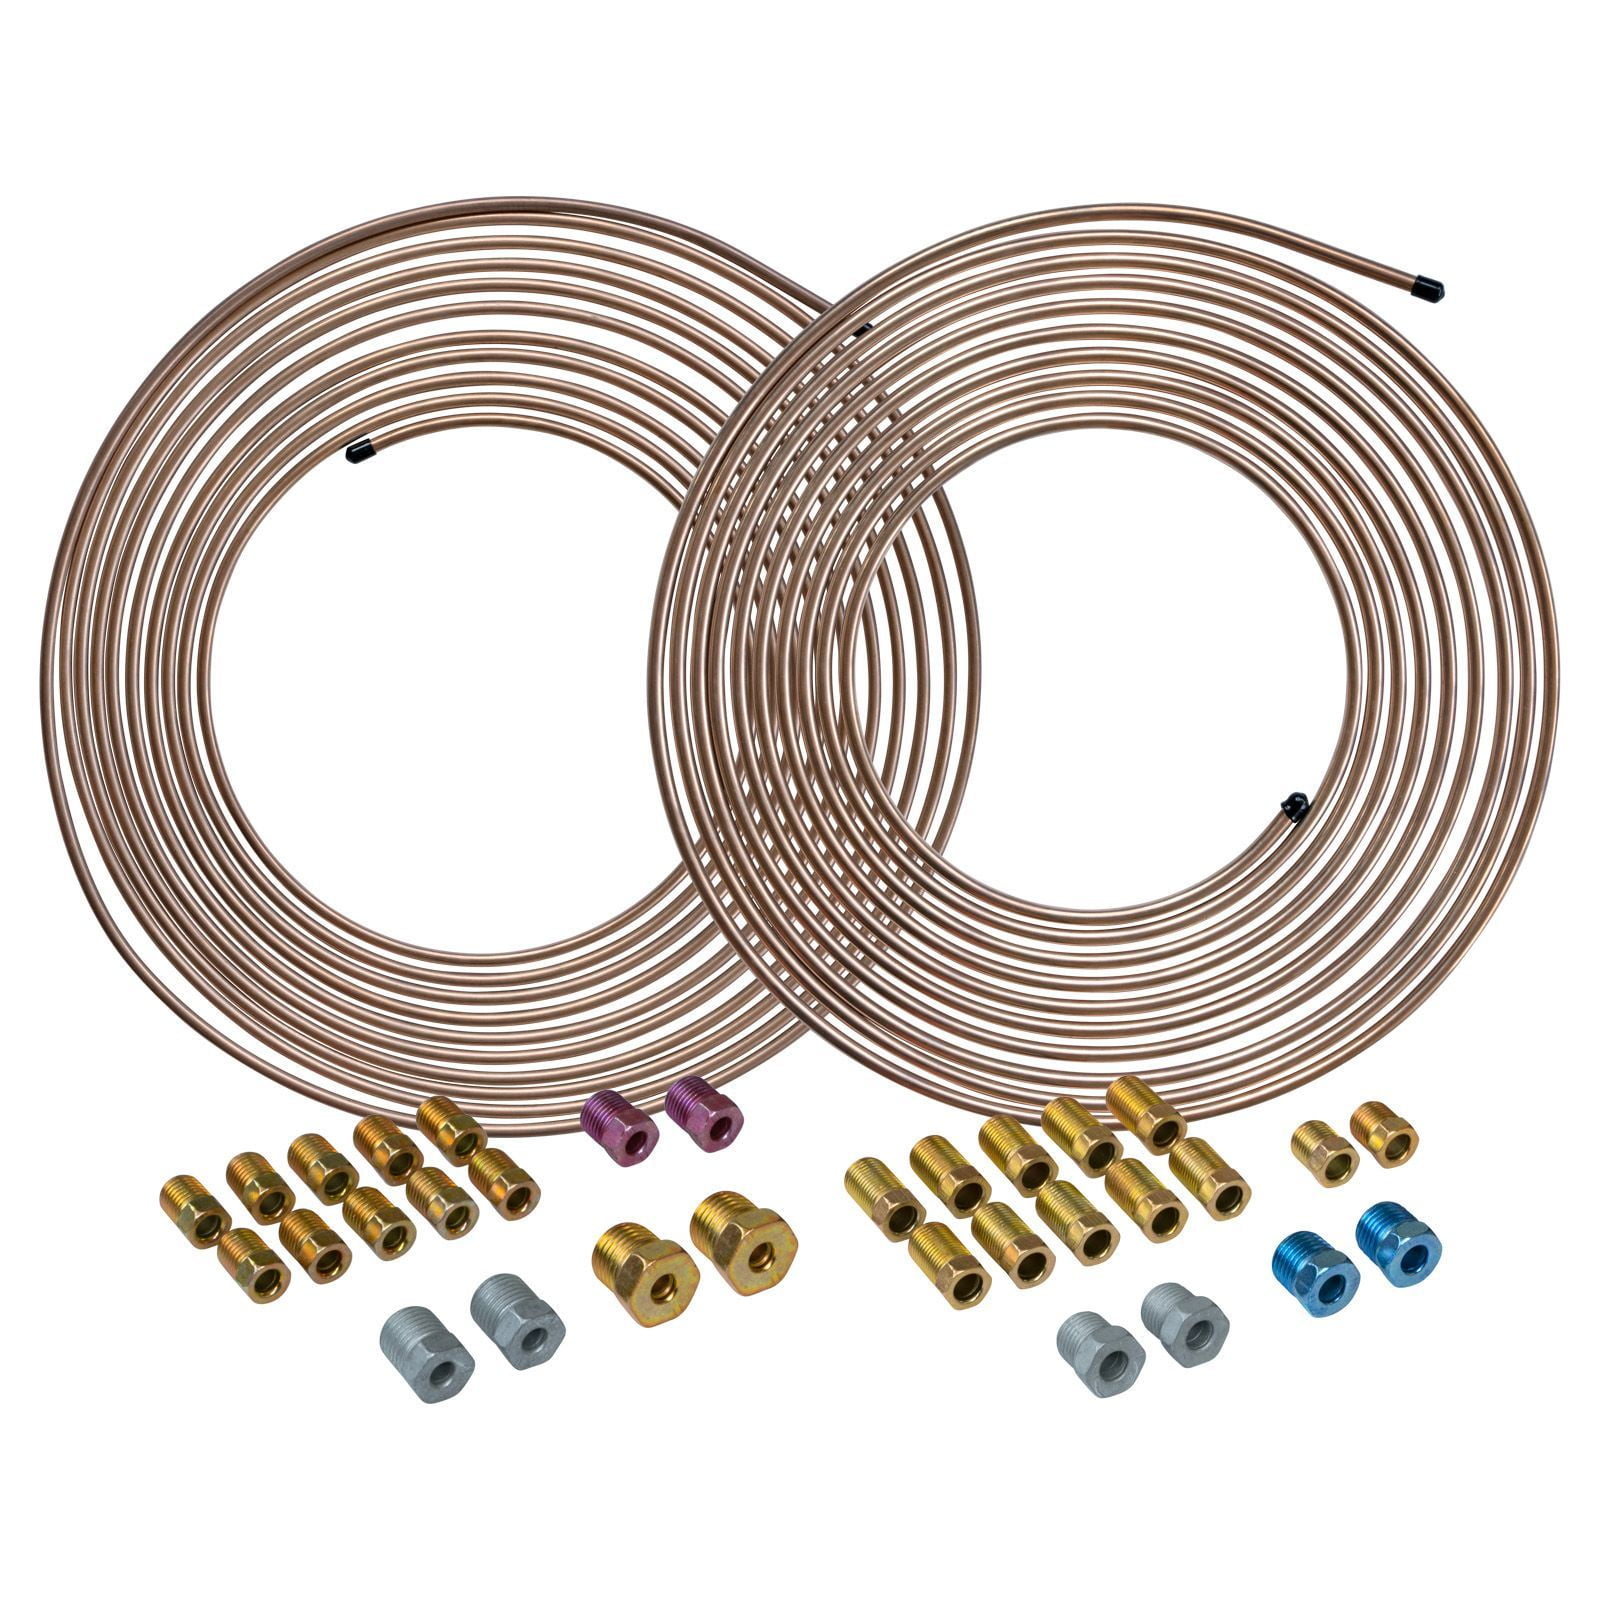 Metpure Ice Maker Fridge Installation Kit – 25' Feet Tubing for Appliance Water  Line with Stop Tee Connection and Valve for Quick Installation, 1/4  Fittings for Potable Drinking Water 